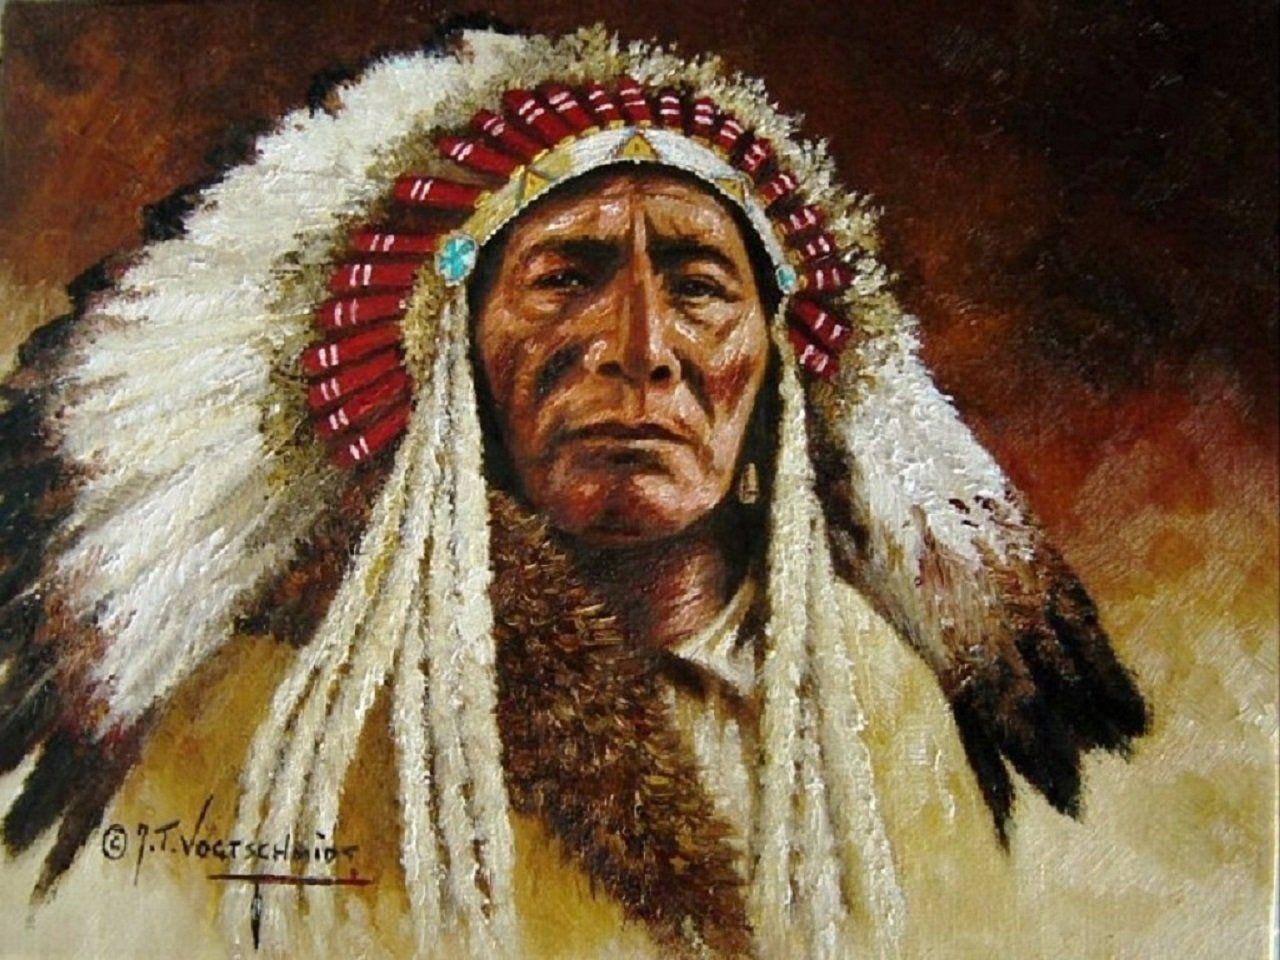 Indian Chief Wallpaper and Background Imagex960